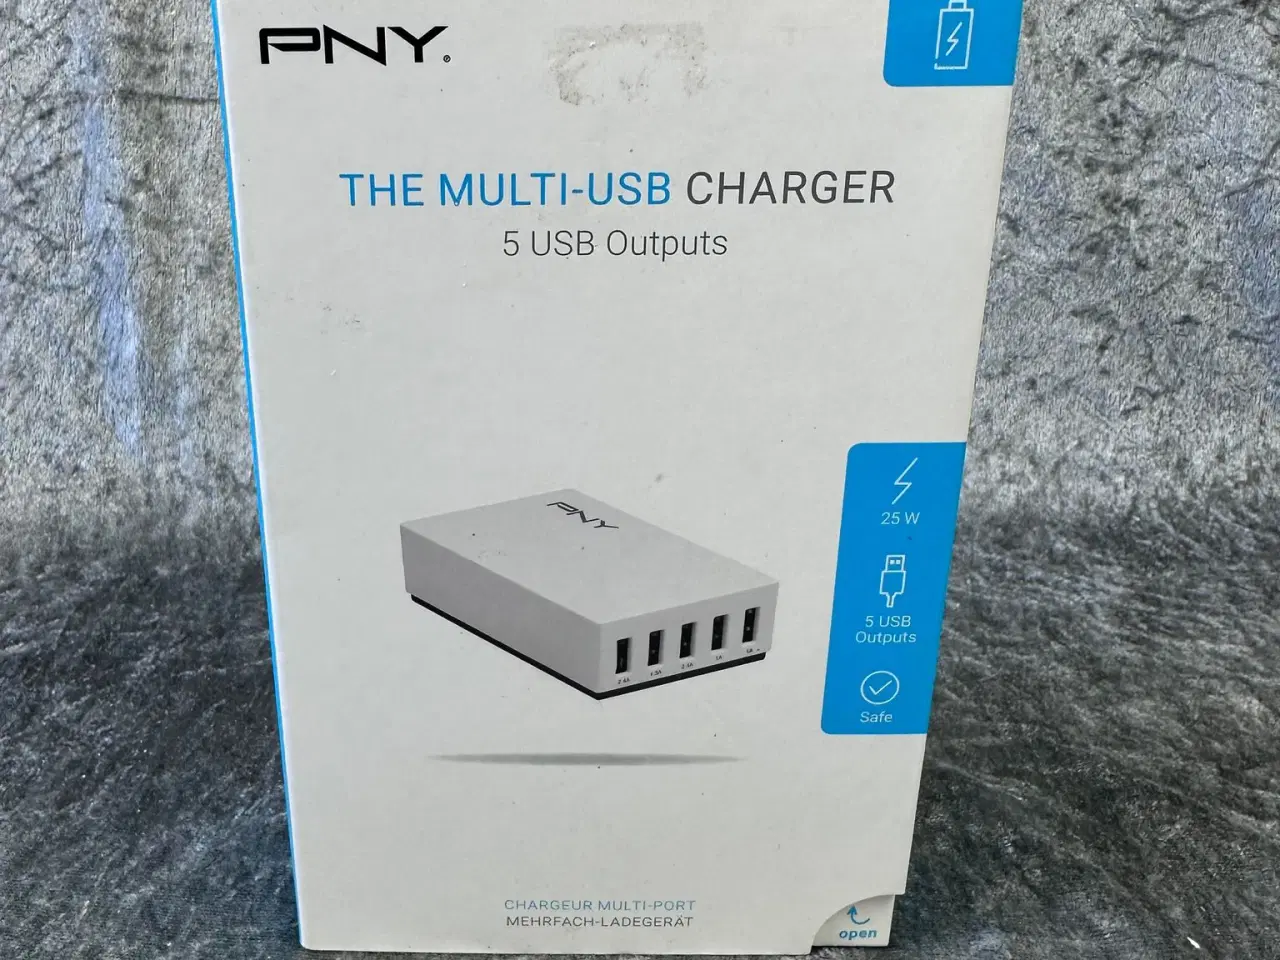 Billede 1 - PNY THE MULTI-USB CHARGER 5 USB Outputs